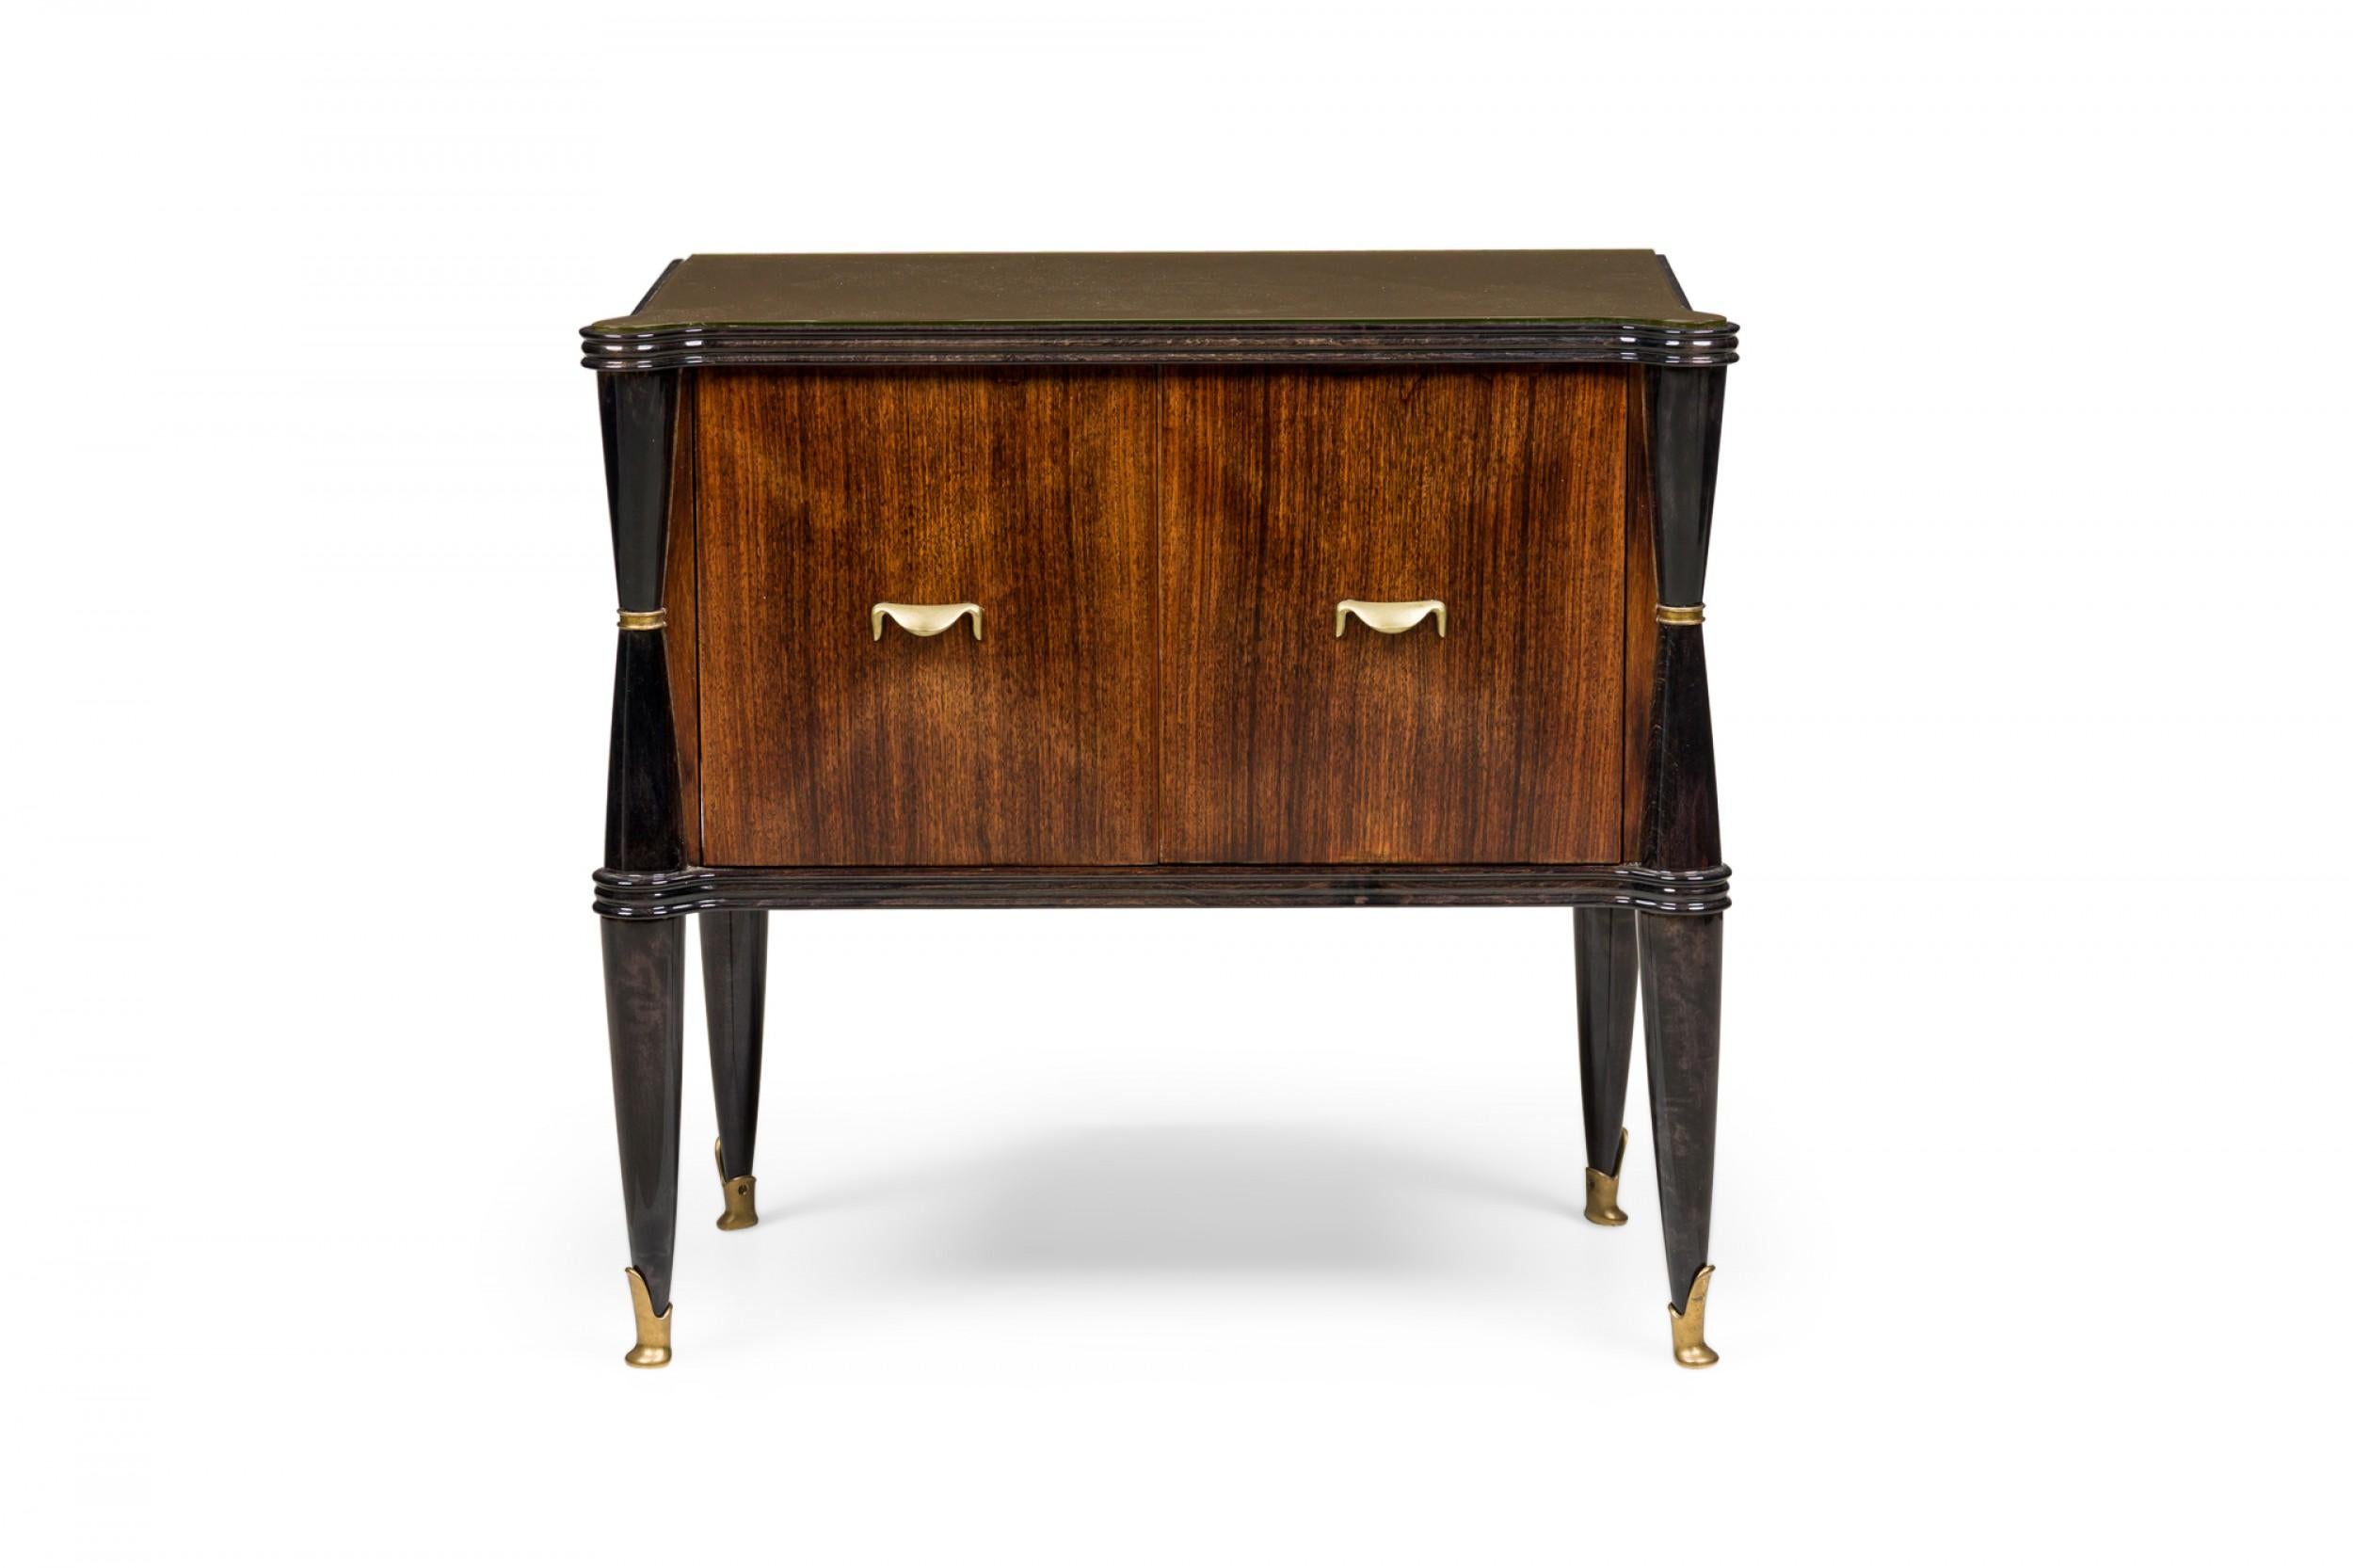 Pair of Art Deco French (bedside) commodes in rectangular form with a shaped, molded ebonized trim enclosing an inset glass top, two fitted hinged doors with bronze lip pulls revealing an interior compartment, standing on ebonized turned legs with